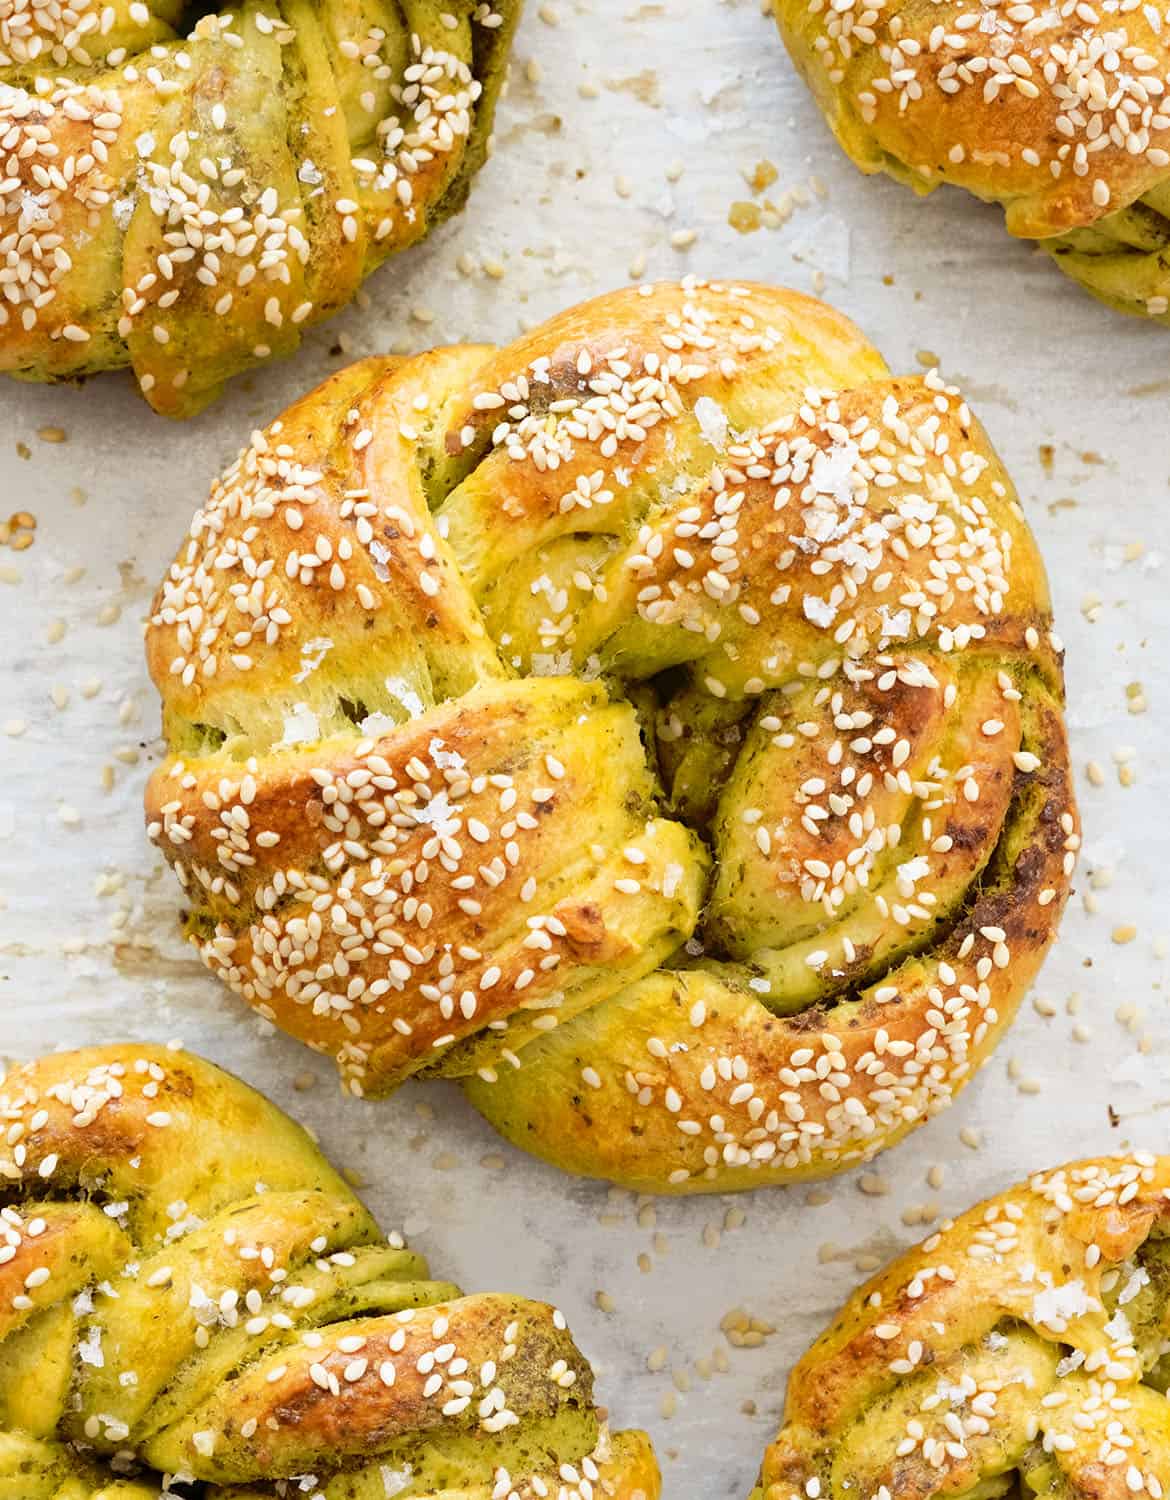 Top view of a large garlic bread knot 
with sesame seeds over white parchment paper.